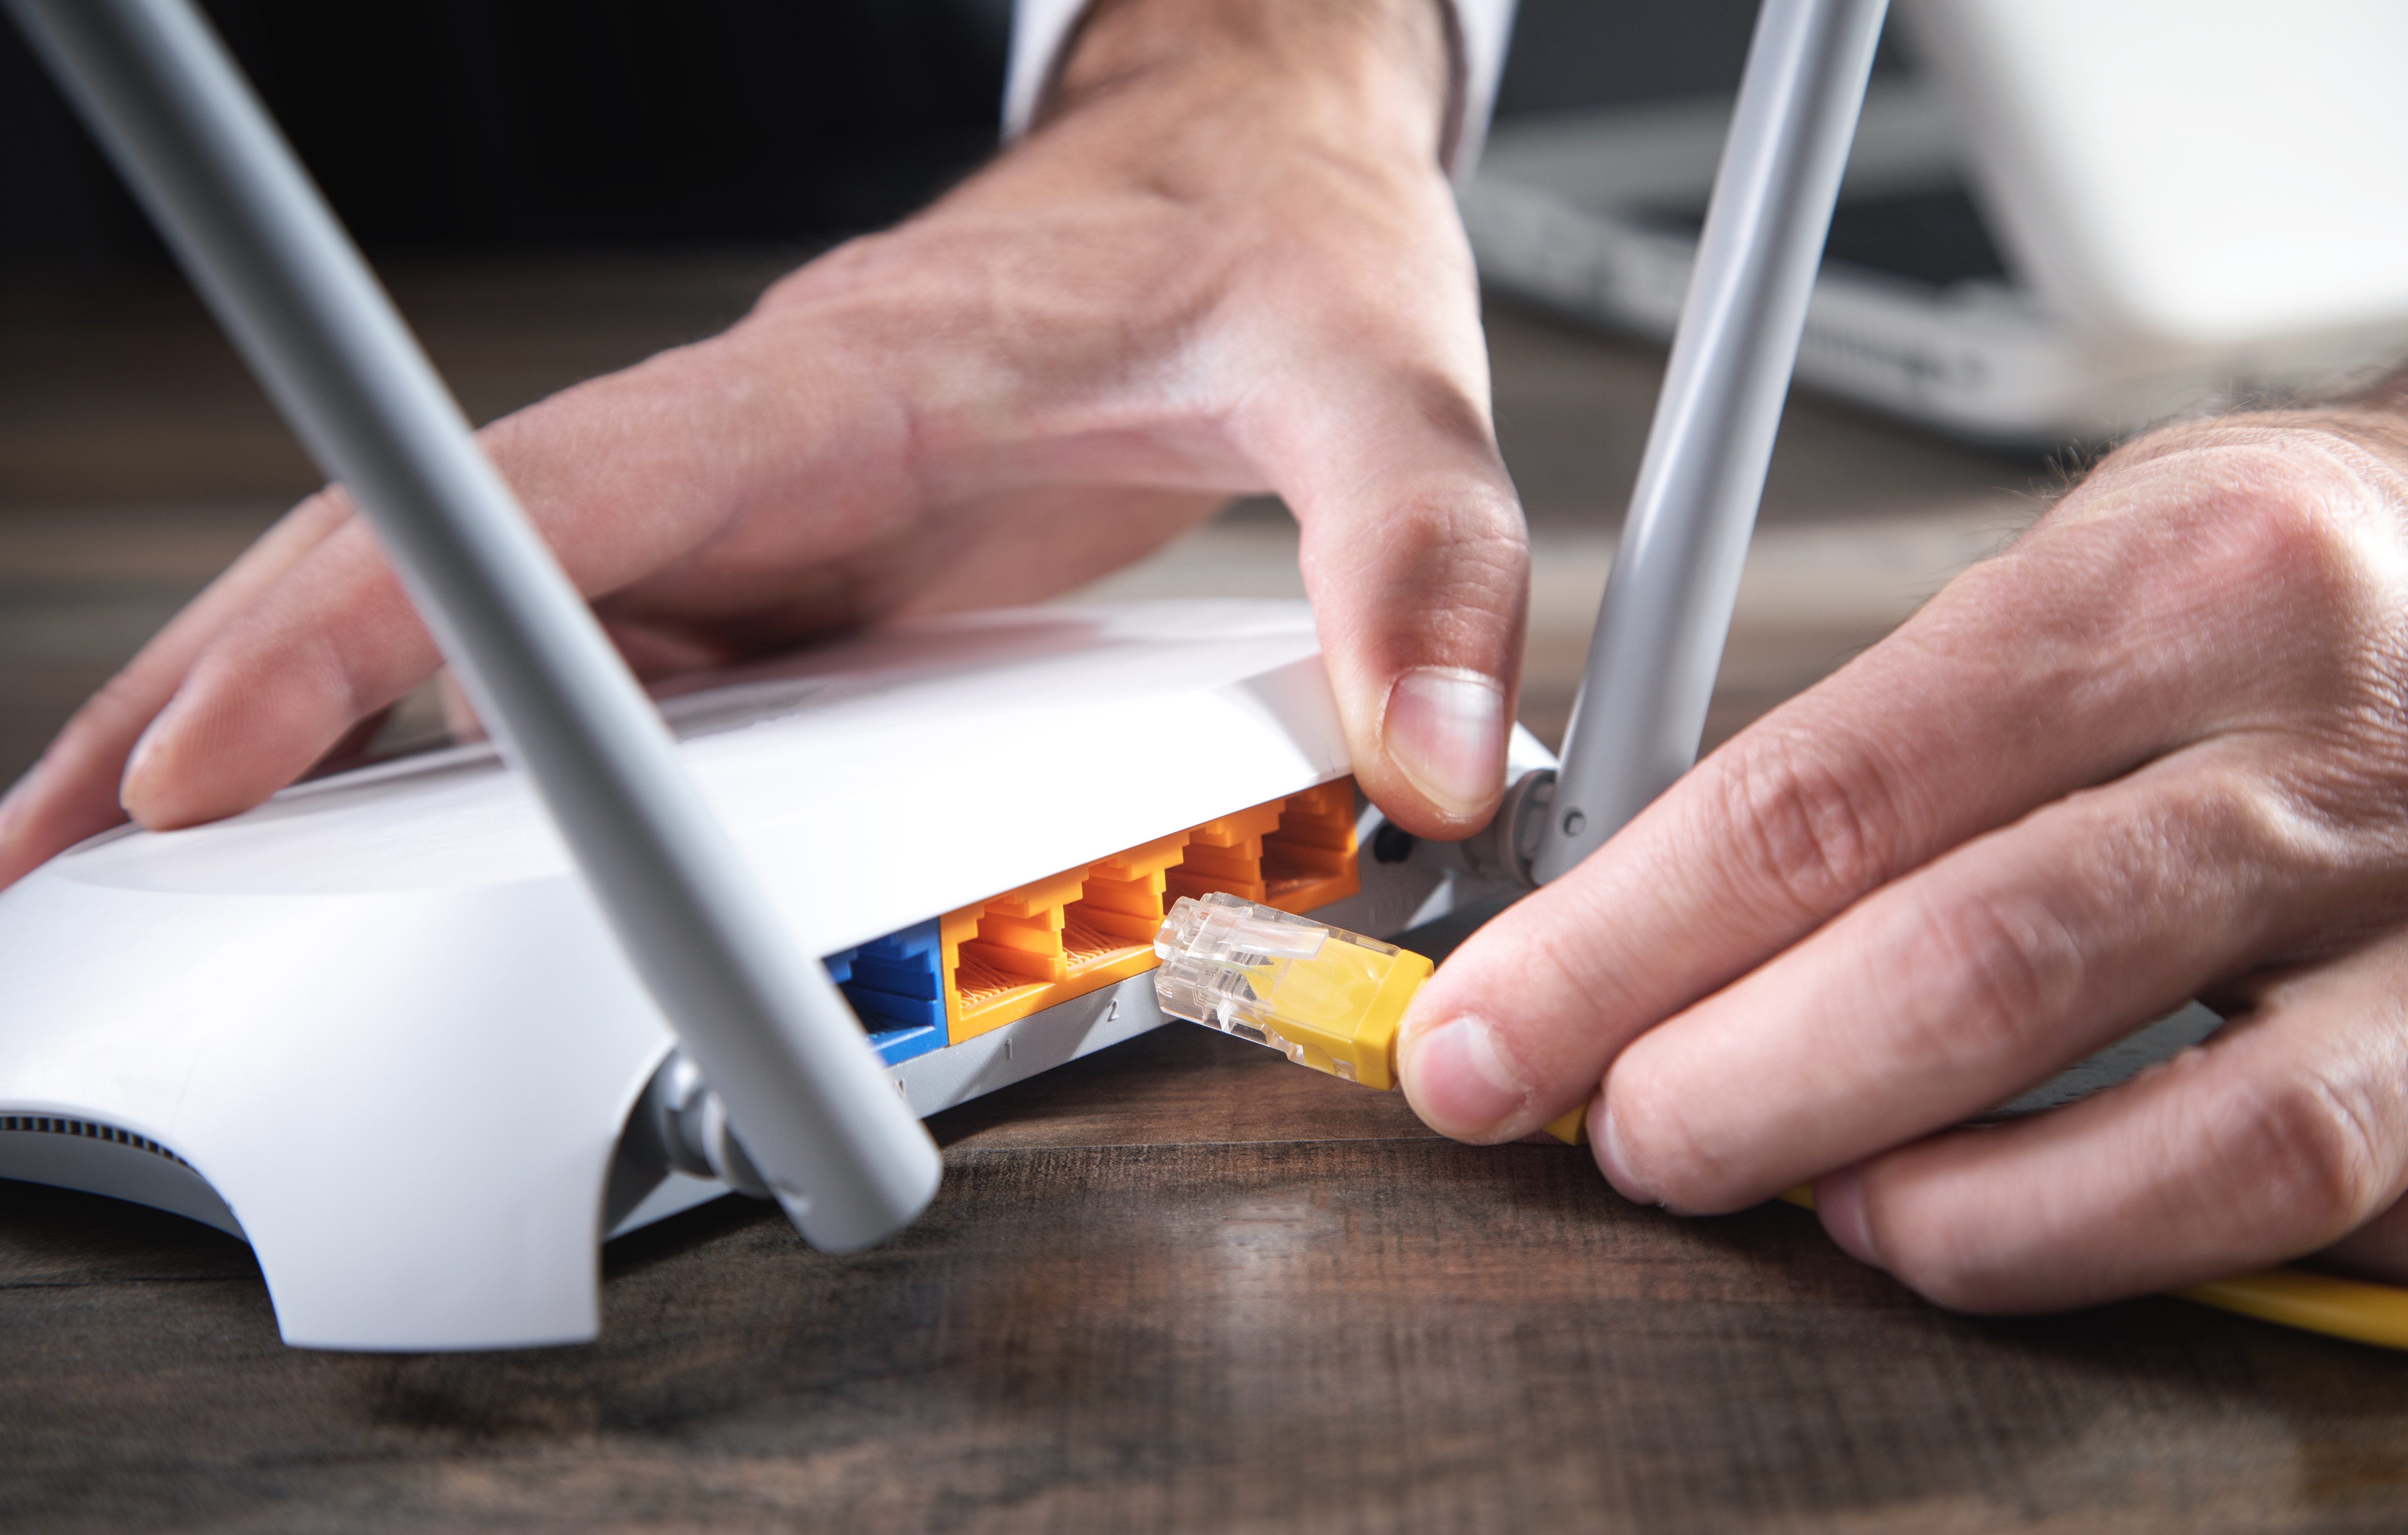 A man plugging a cable into an internet router | Source: Shutterstock